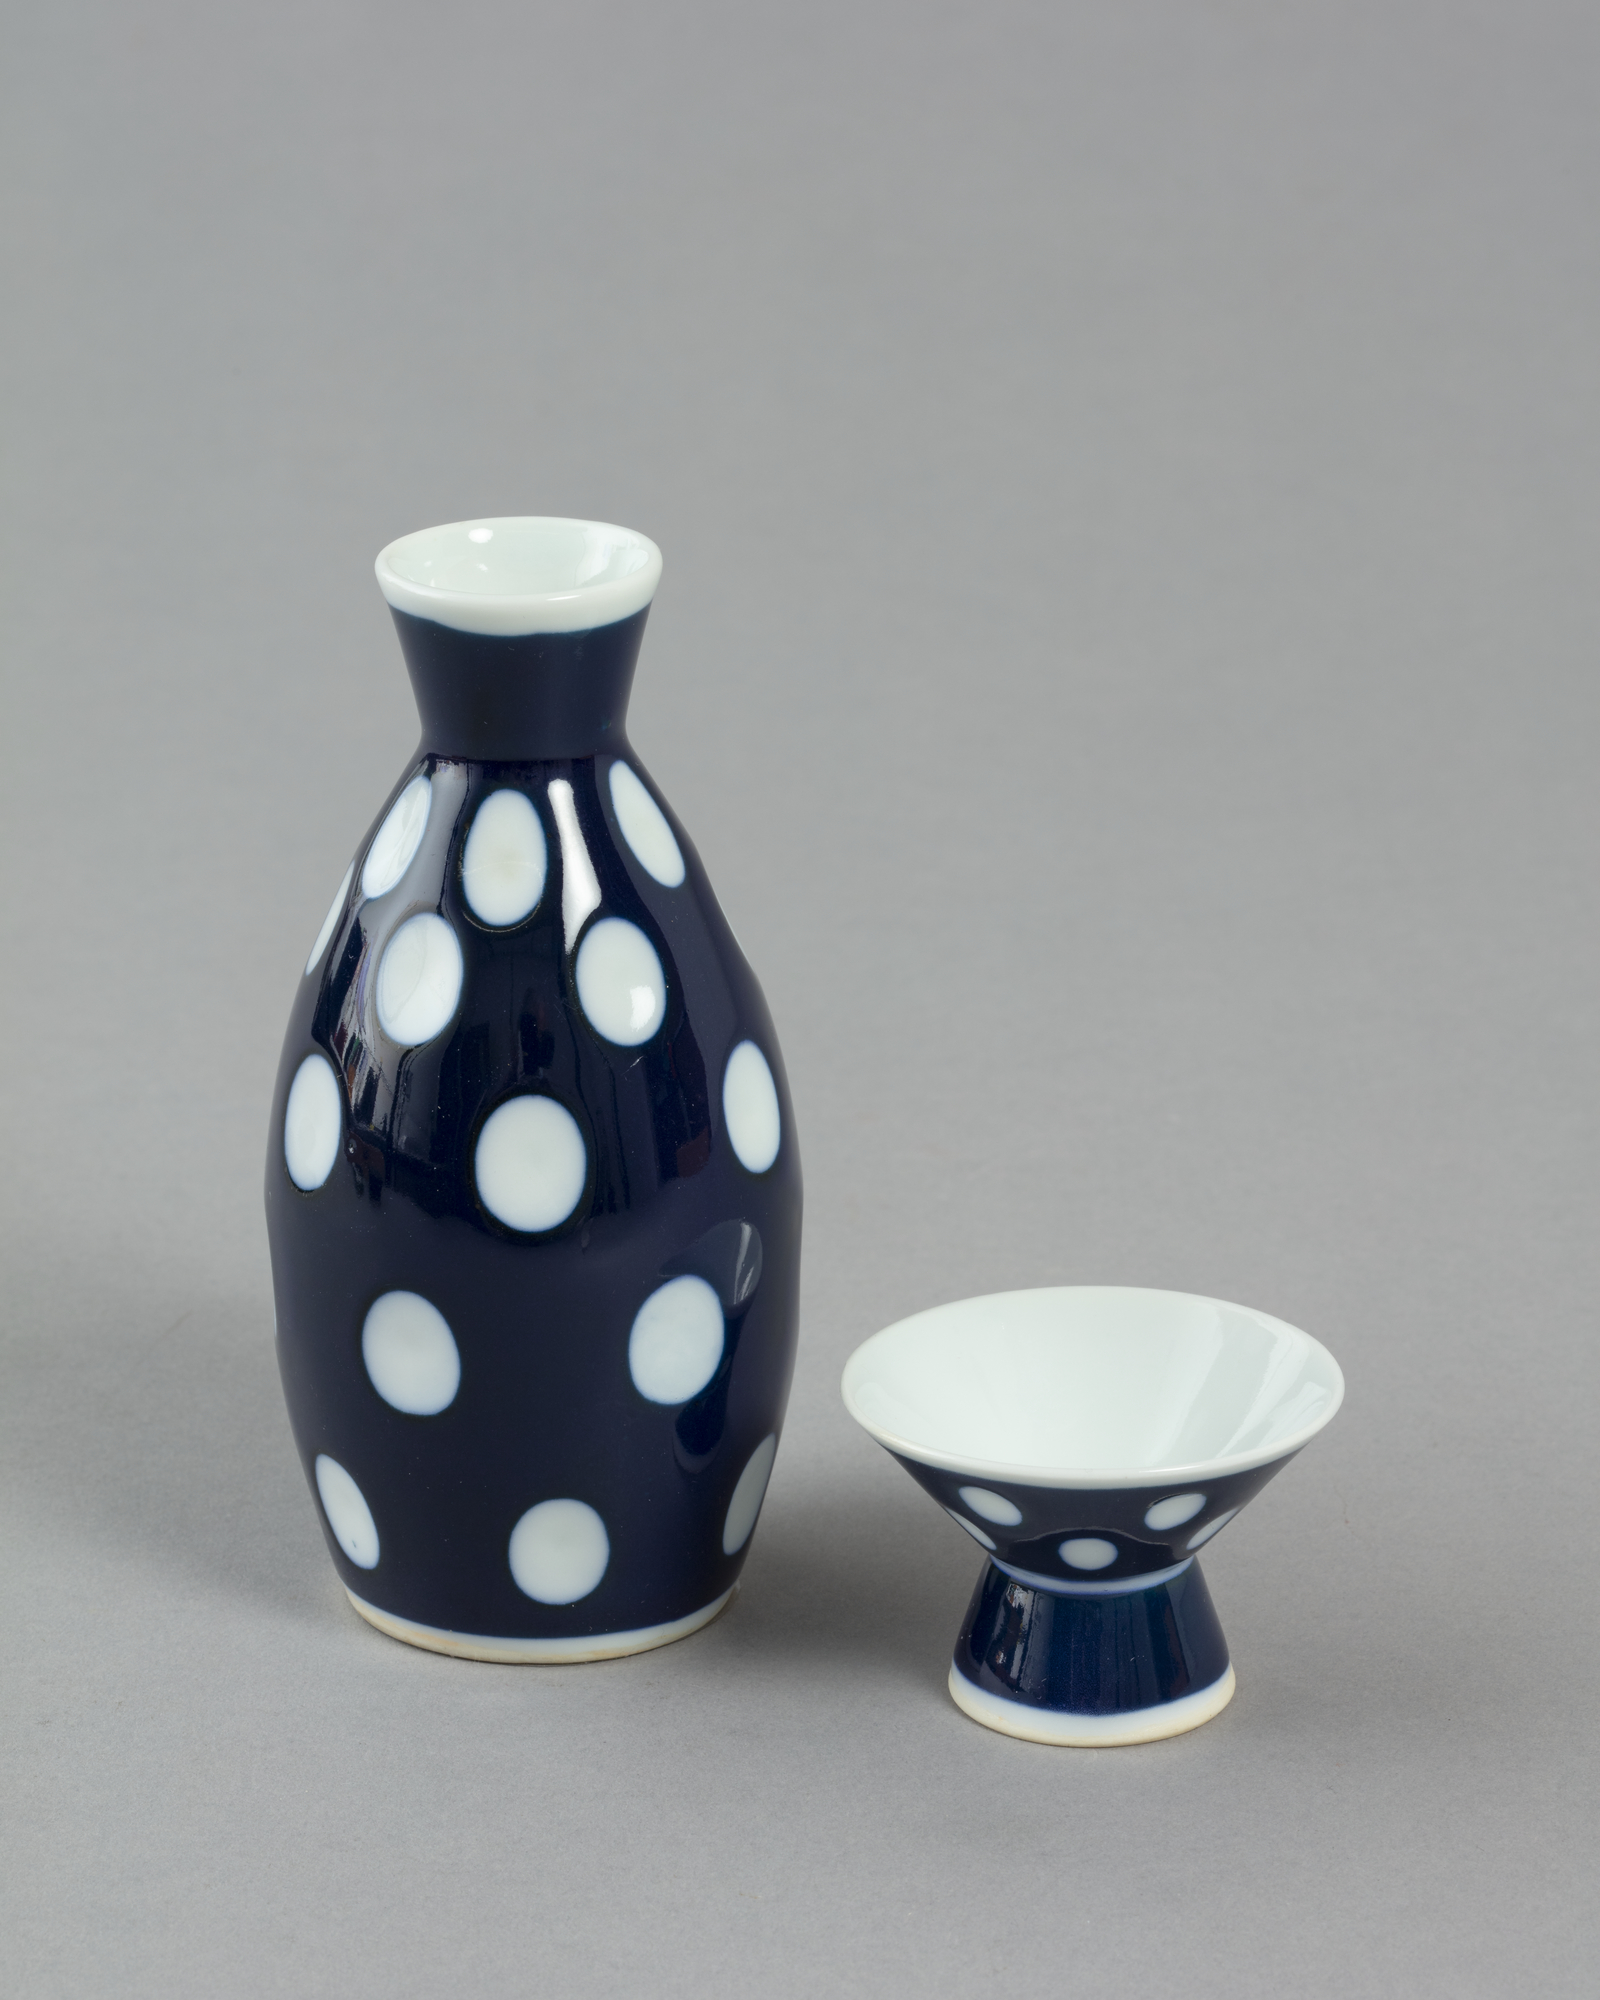 Sake flask and cup with dark blue design with white spots